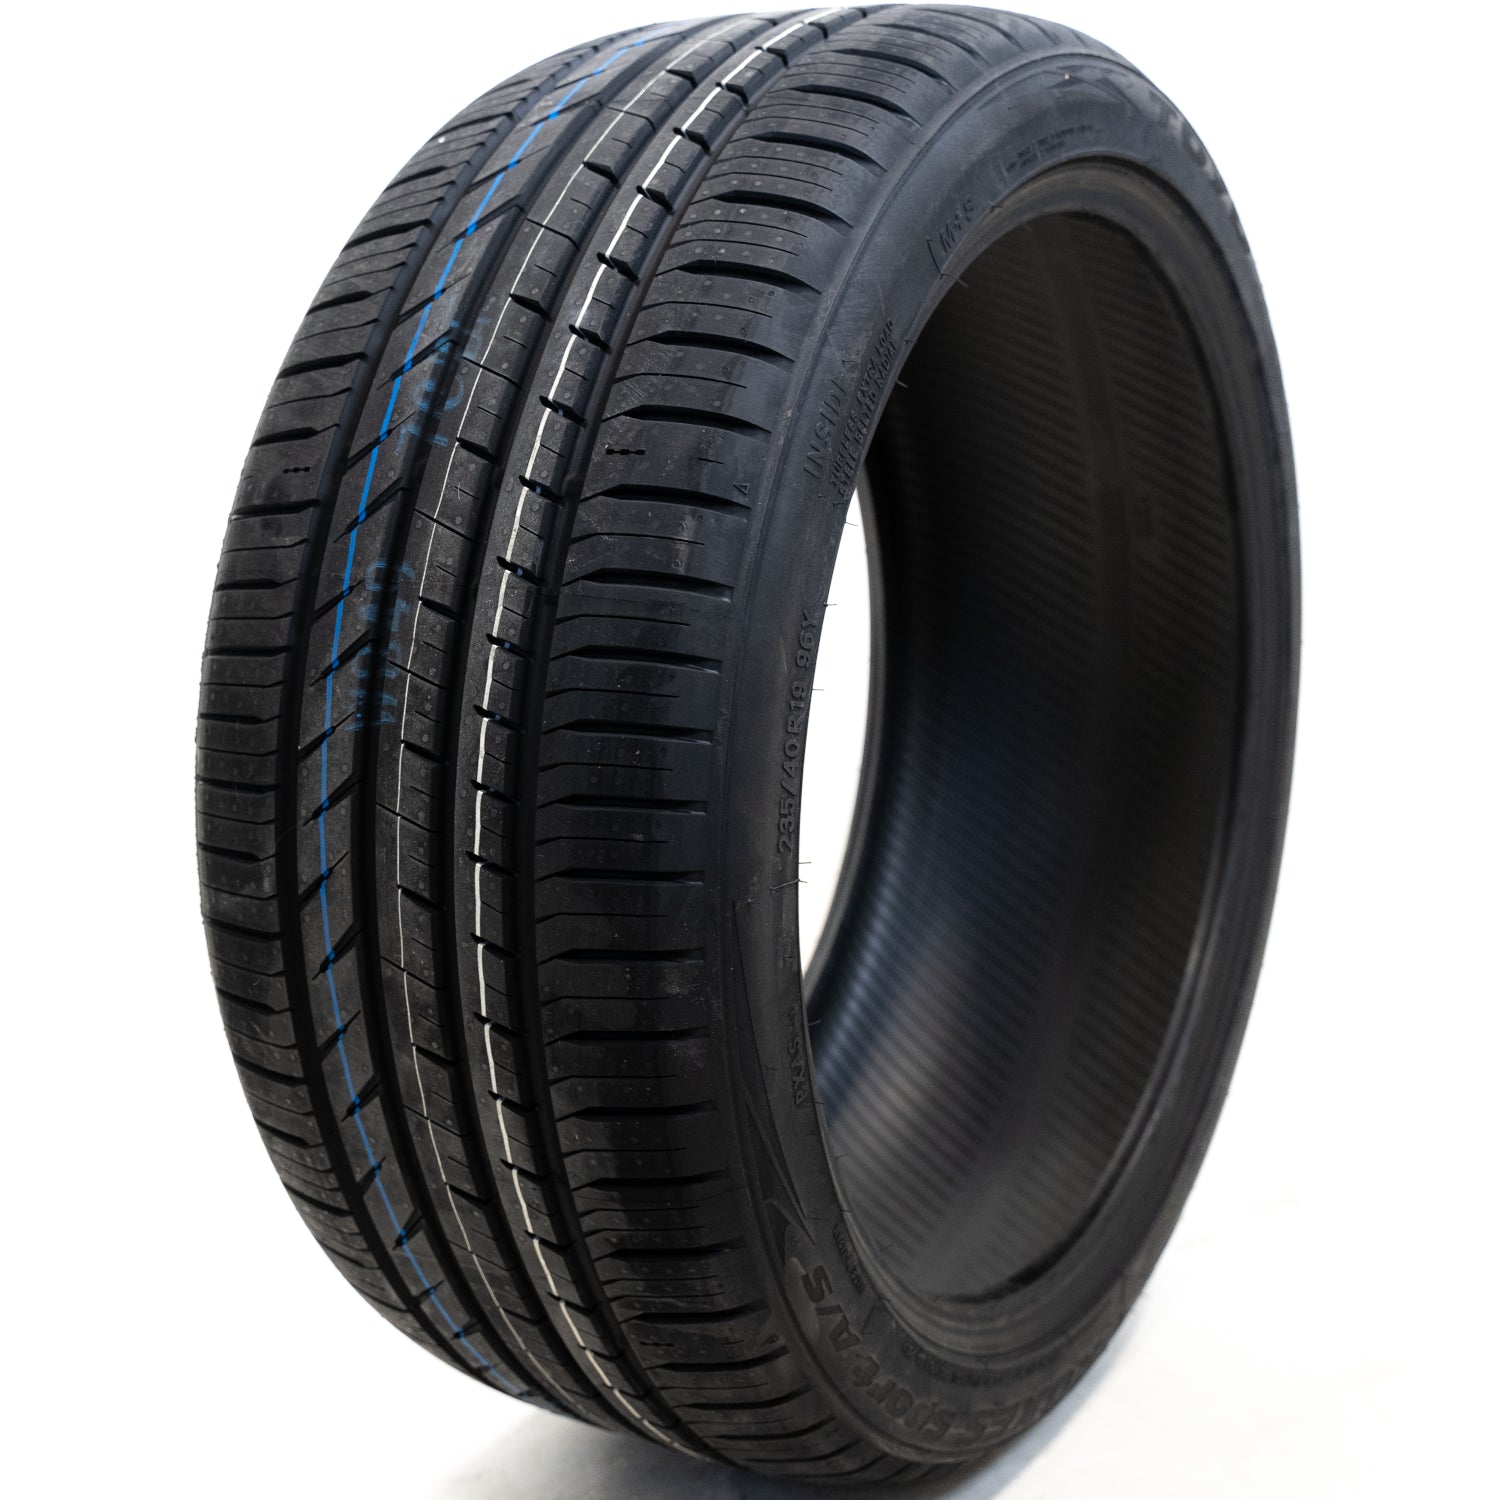 TOYO TIRES PROXES SPORT A/S 205/55R16XL (24.9X8.1R 16) Tires